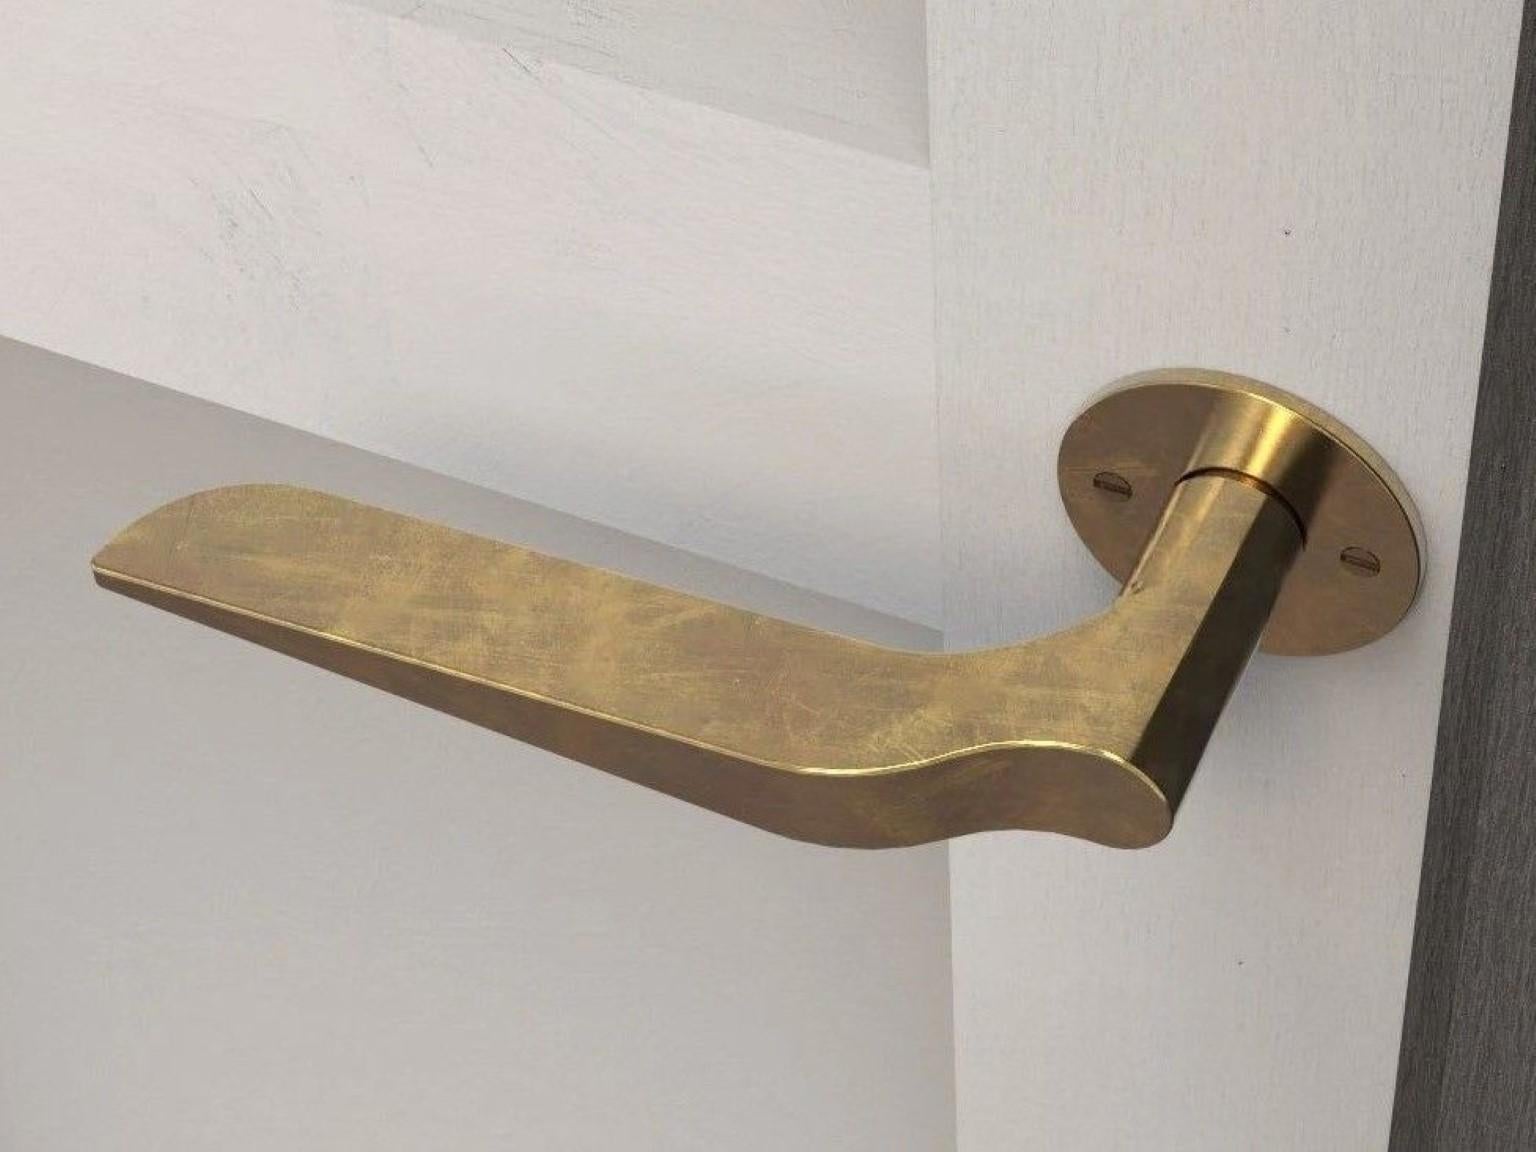 Palais brass door handle by Henry Wilson
Dimensions: D 6.4 x W 13 x 1.9 cm 
Materials: Brass

Palais lever handle in high tensile brass or aluminium. Each handle is individually investment cast from a wax positive, vibration polished and